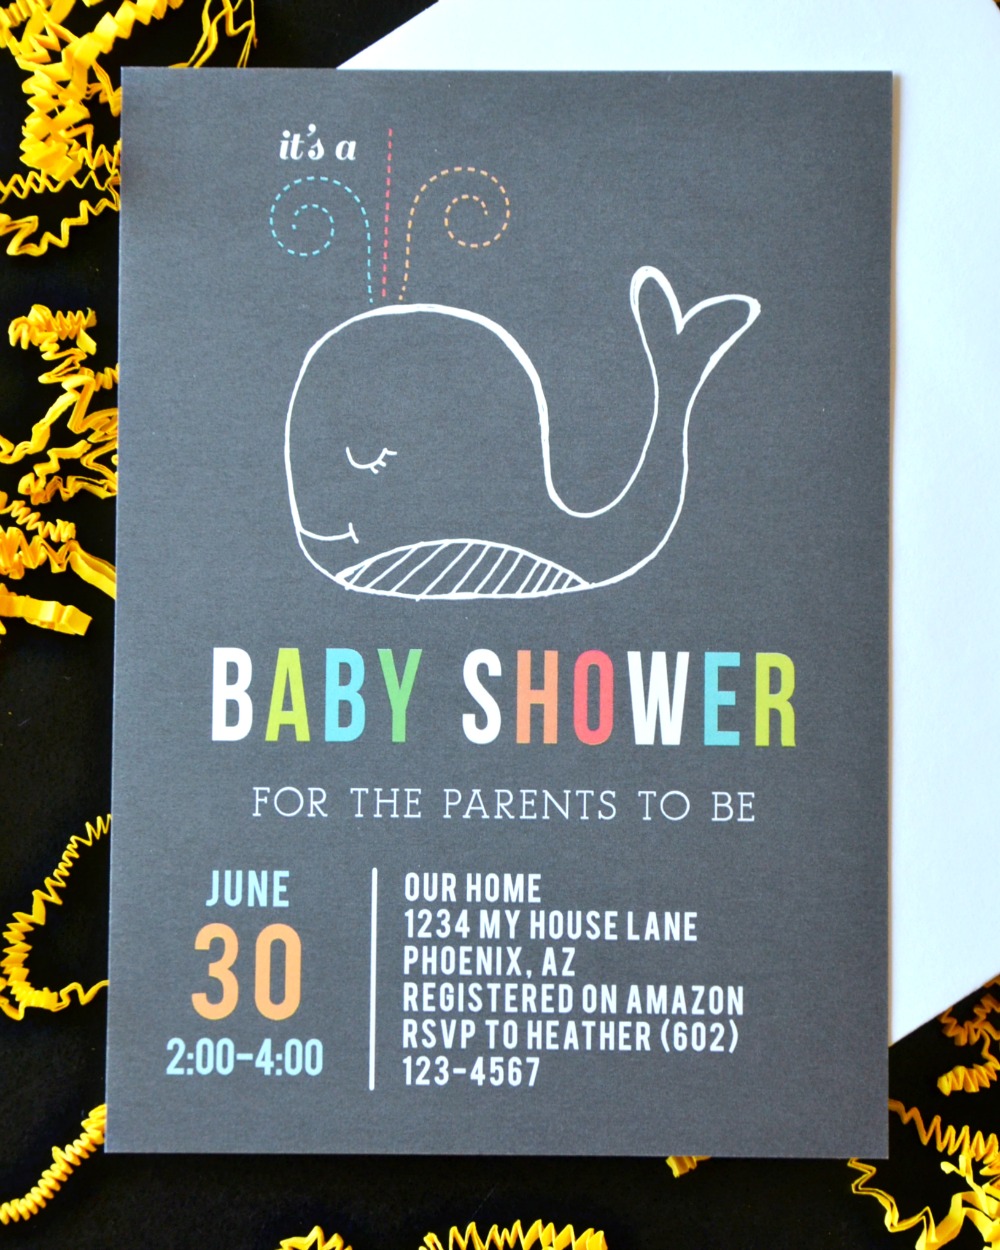 Plan an animal themed baby shower with these cute whale invitations.